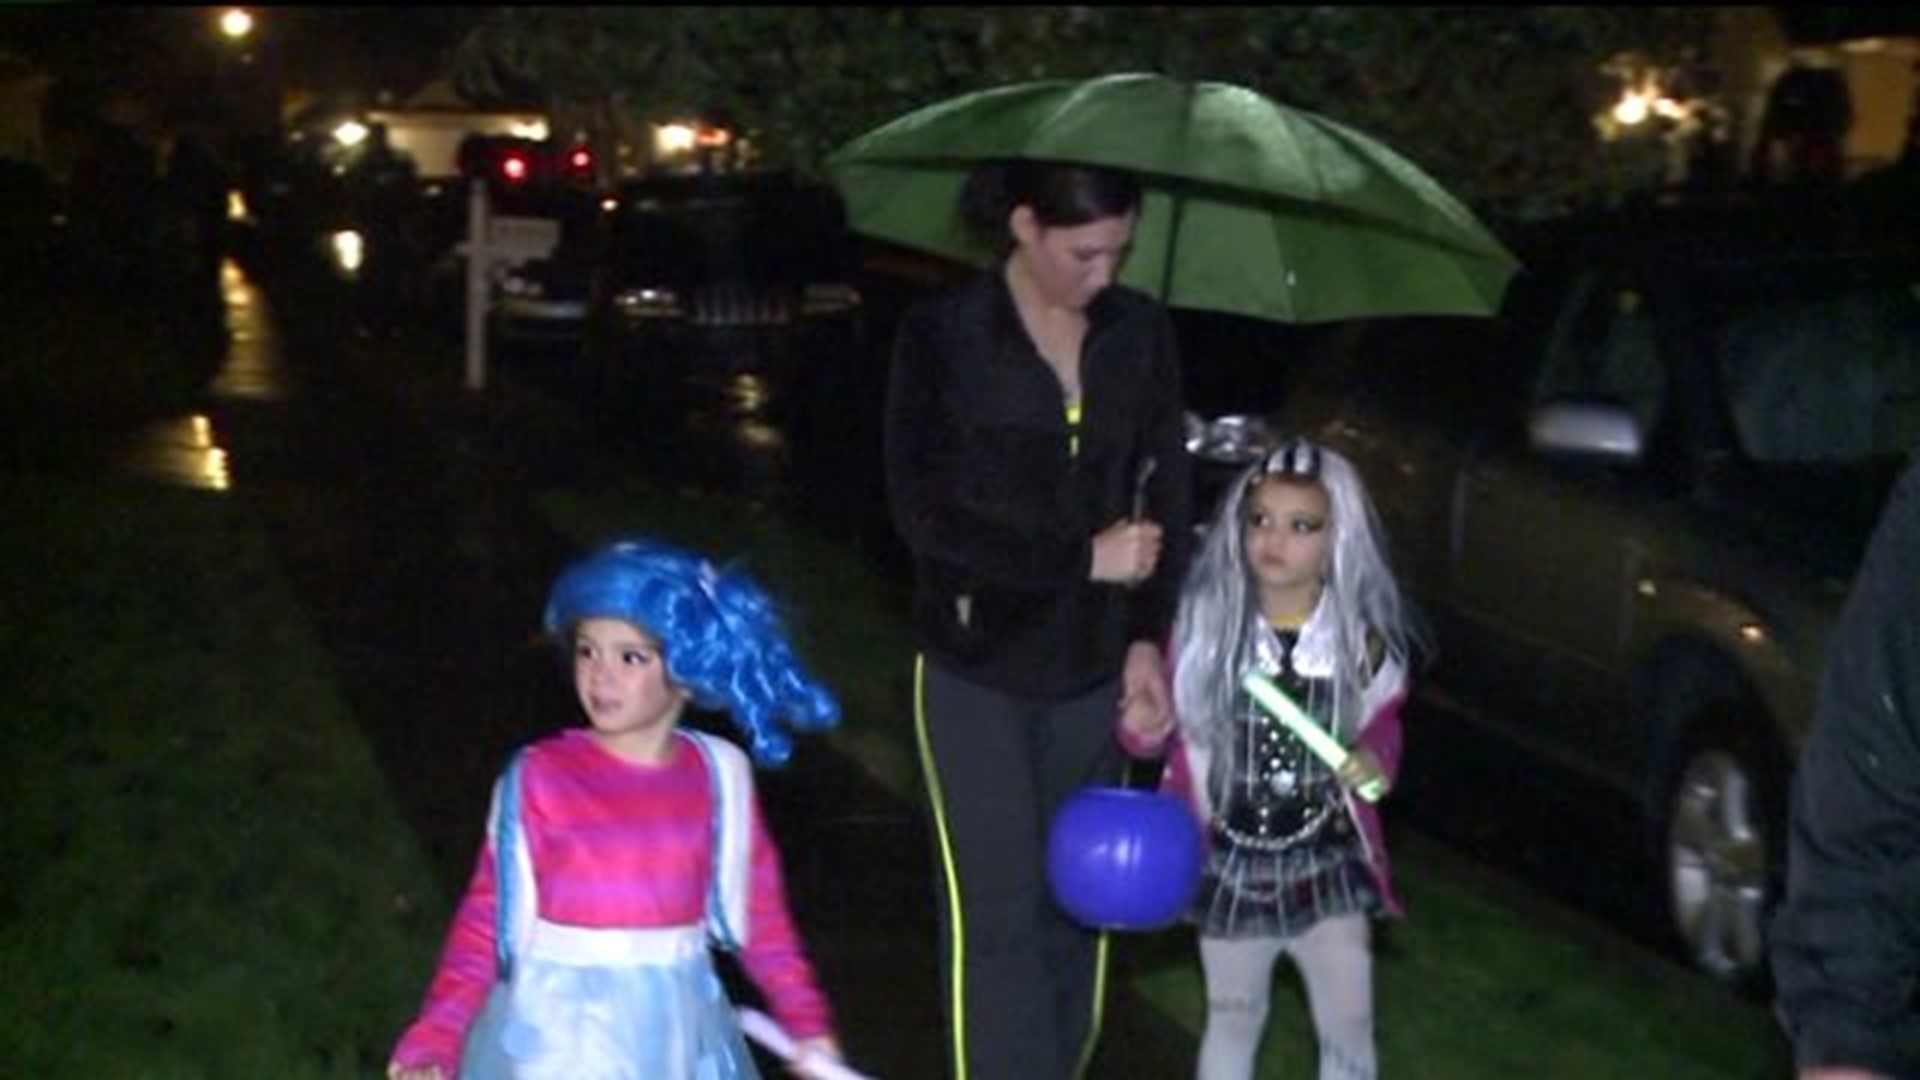 How to Stay Safe While Trick-or-Treating